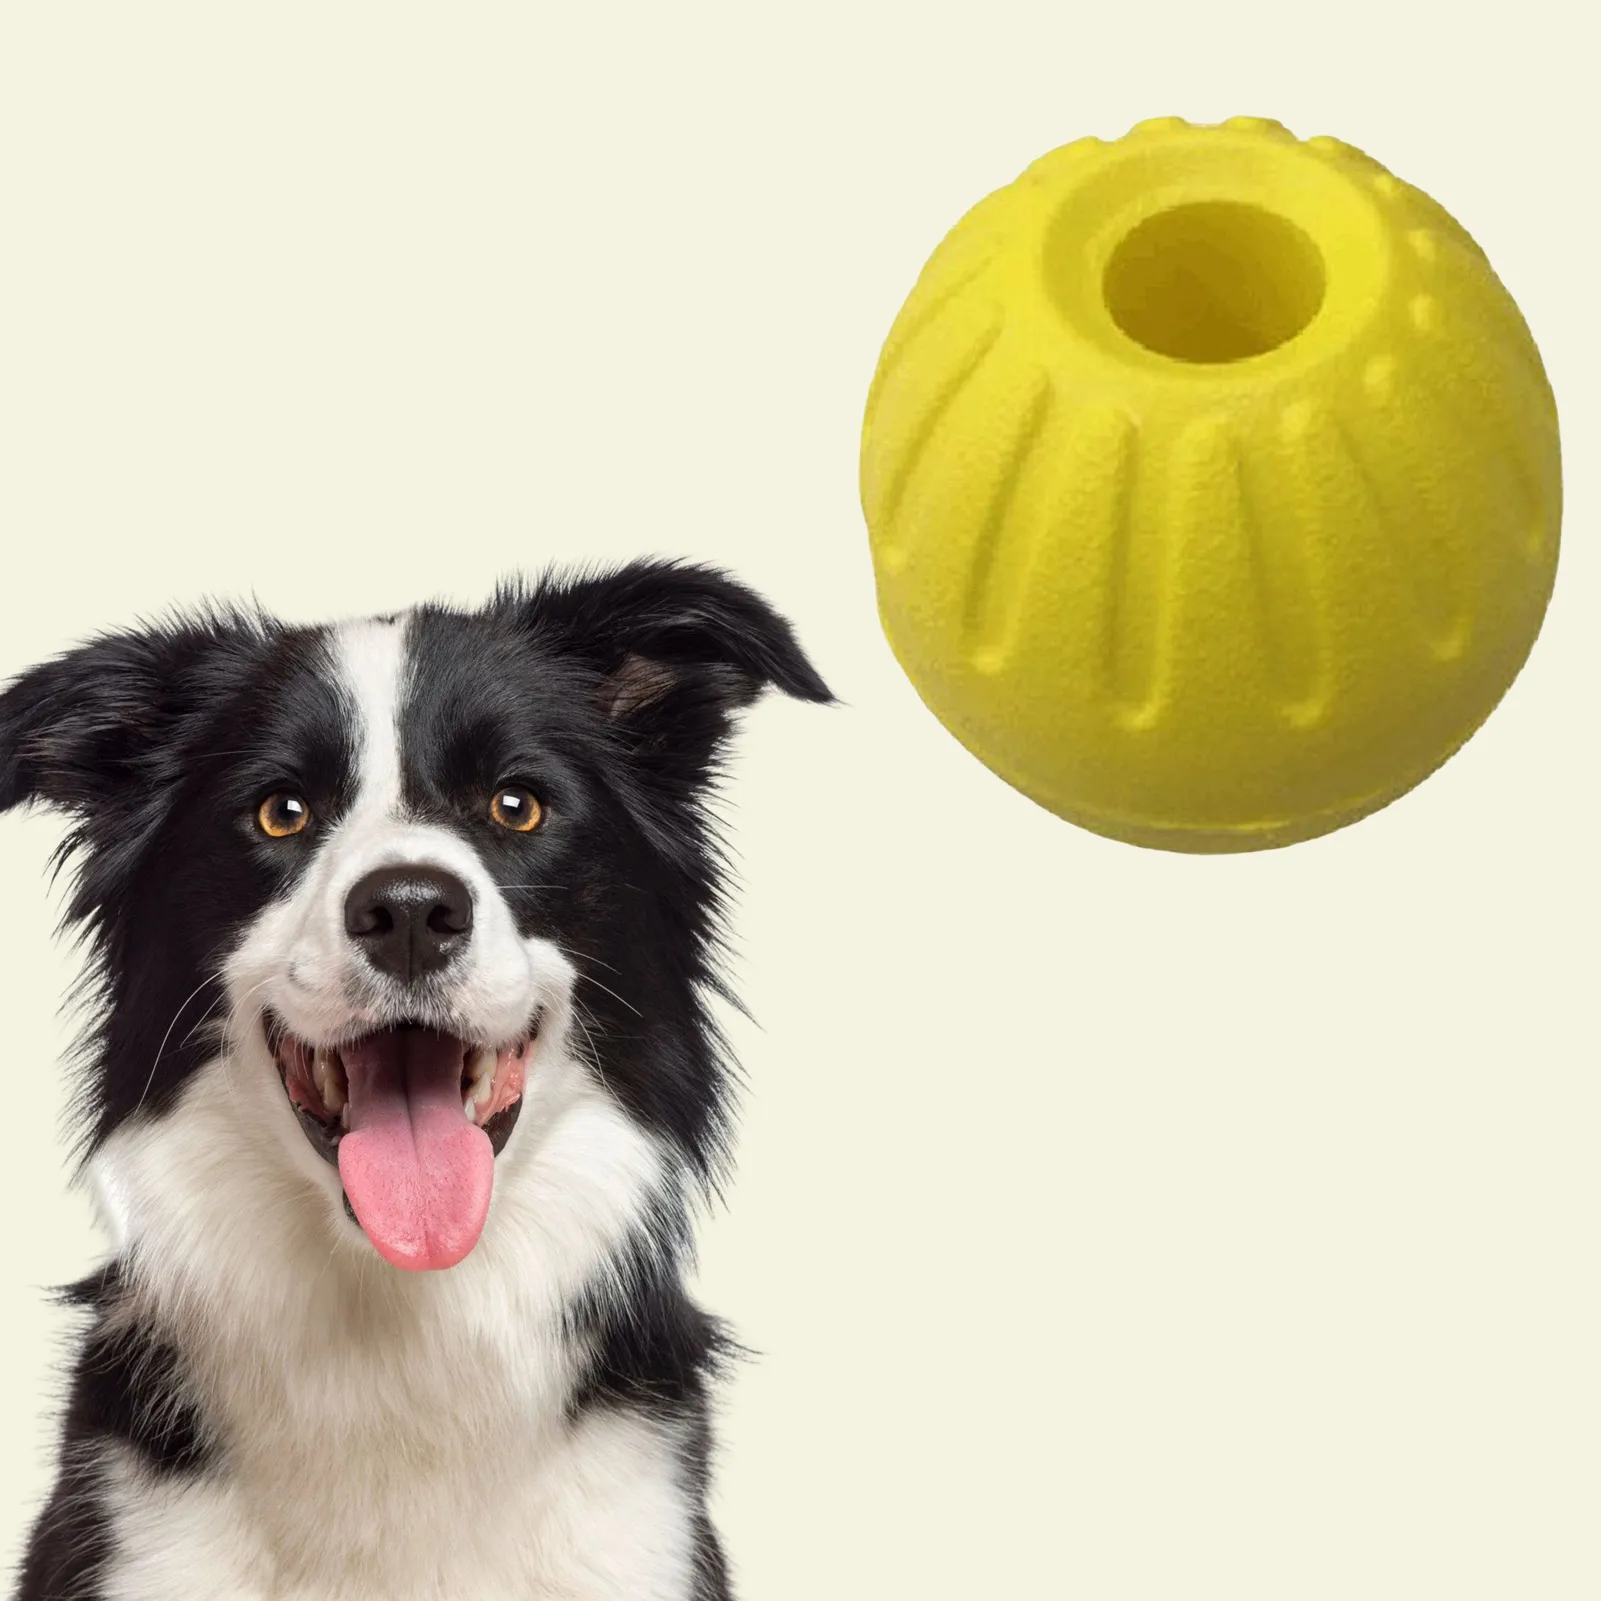 https://ae01.alicdn.com/kf/S00a50d03fecc4d67b136f8d317ac162cN/Pet-Ball-Toy-without-Rope-Interactive-Dog-Training-Chew-Tooth-Cleaning-Indestructible-Healthy-Solid-Core-EVA.jpg